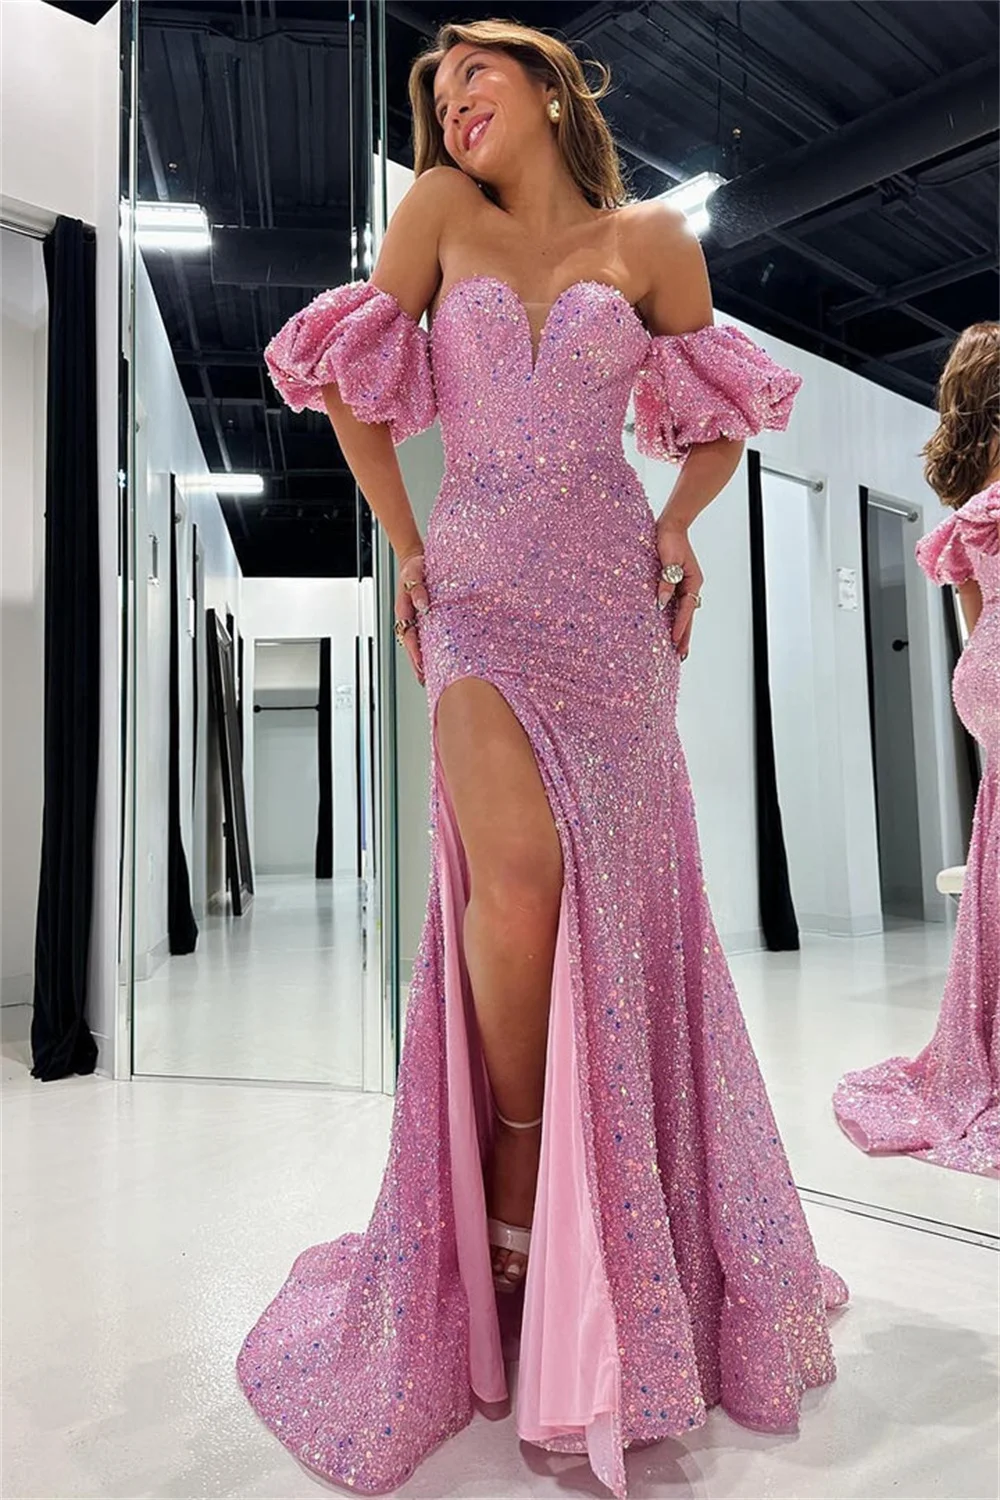 

Sweetheart Sequin Mermaid Cocktail Dresses With Split Side Sparkly Corset Prom Gowns Backless Formal Evening Removable Sleeves